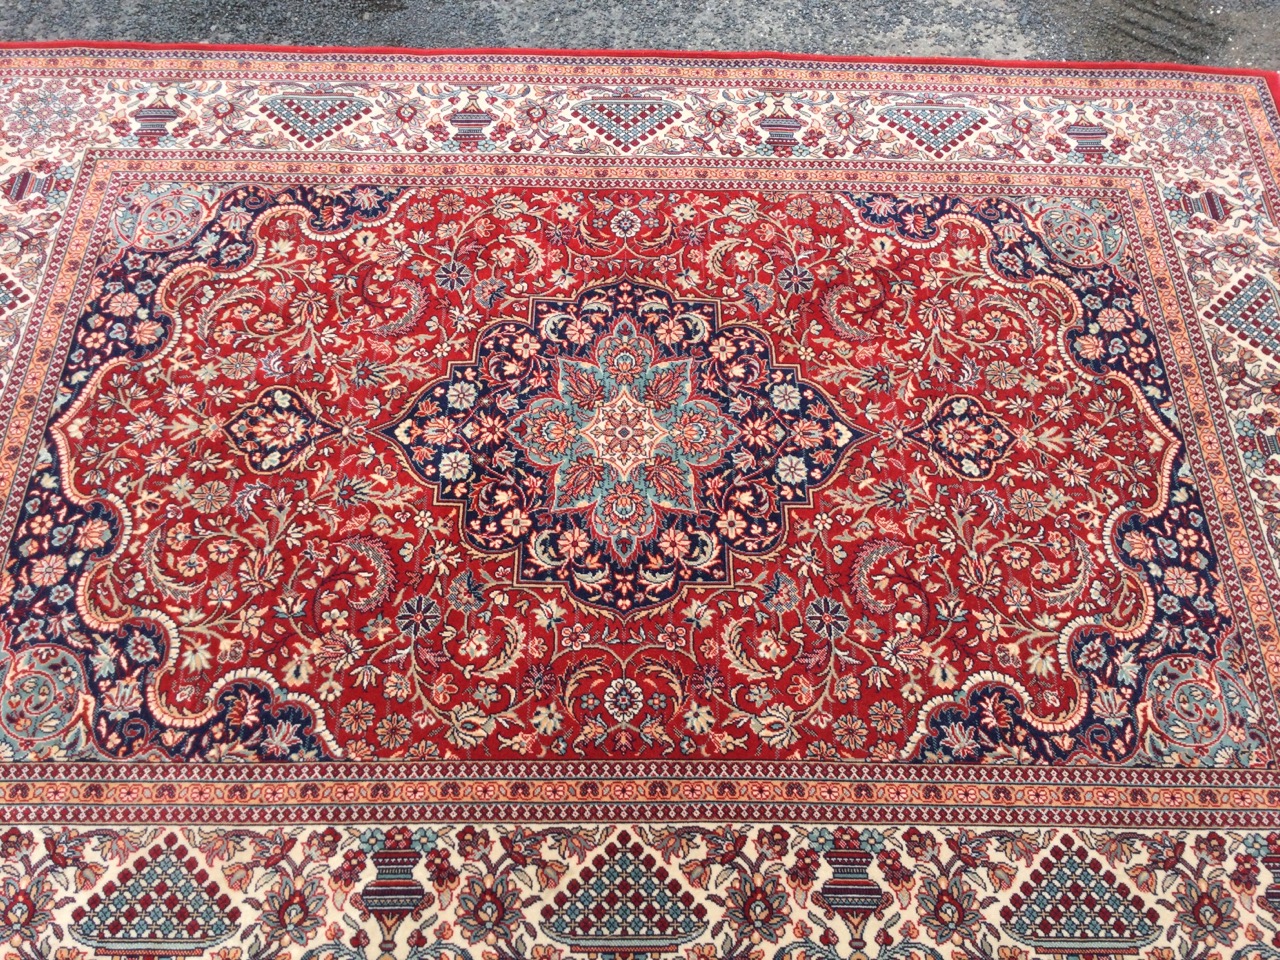 An Indian rug woven with busy red floral field framing a central scalloped blue floral medallion - Image 2 of 3